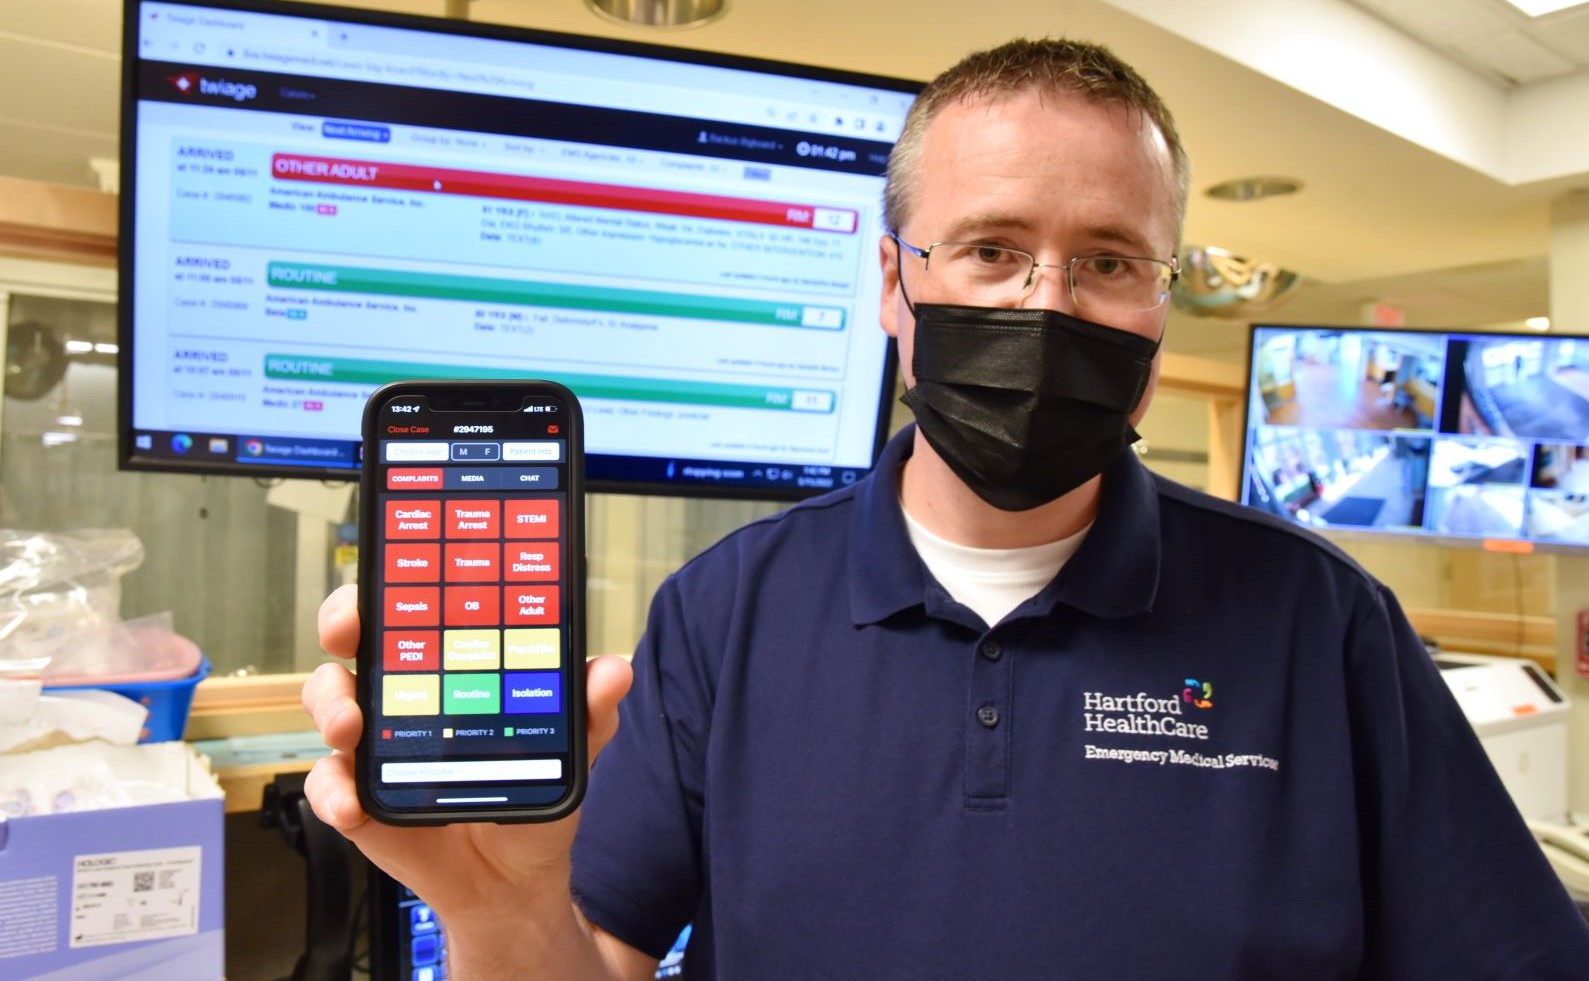 Saving Time When Seconds Count in an Emergency? There’s an App for That